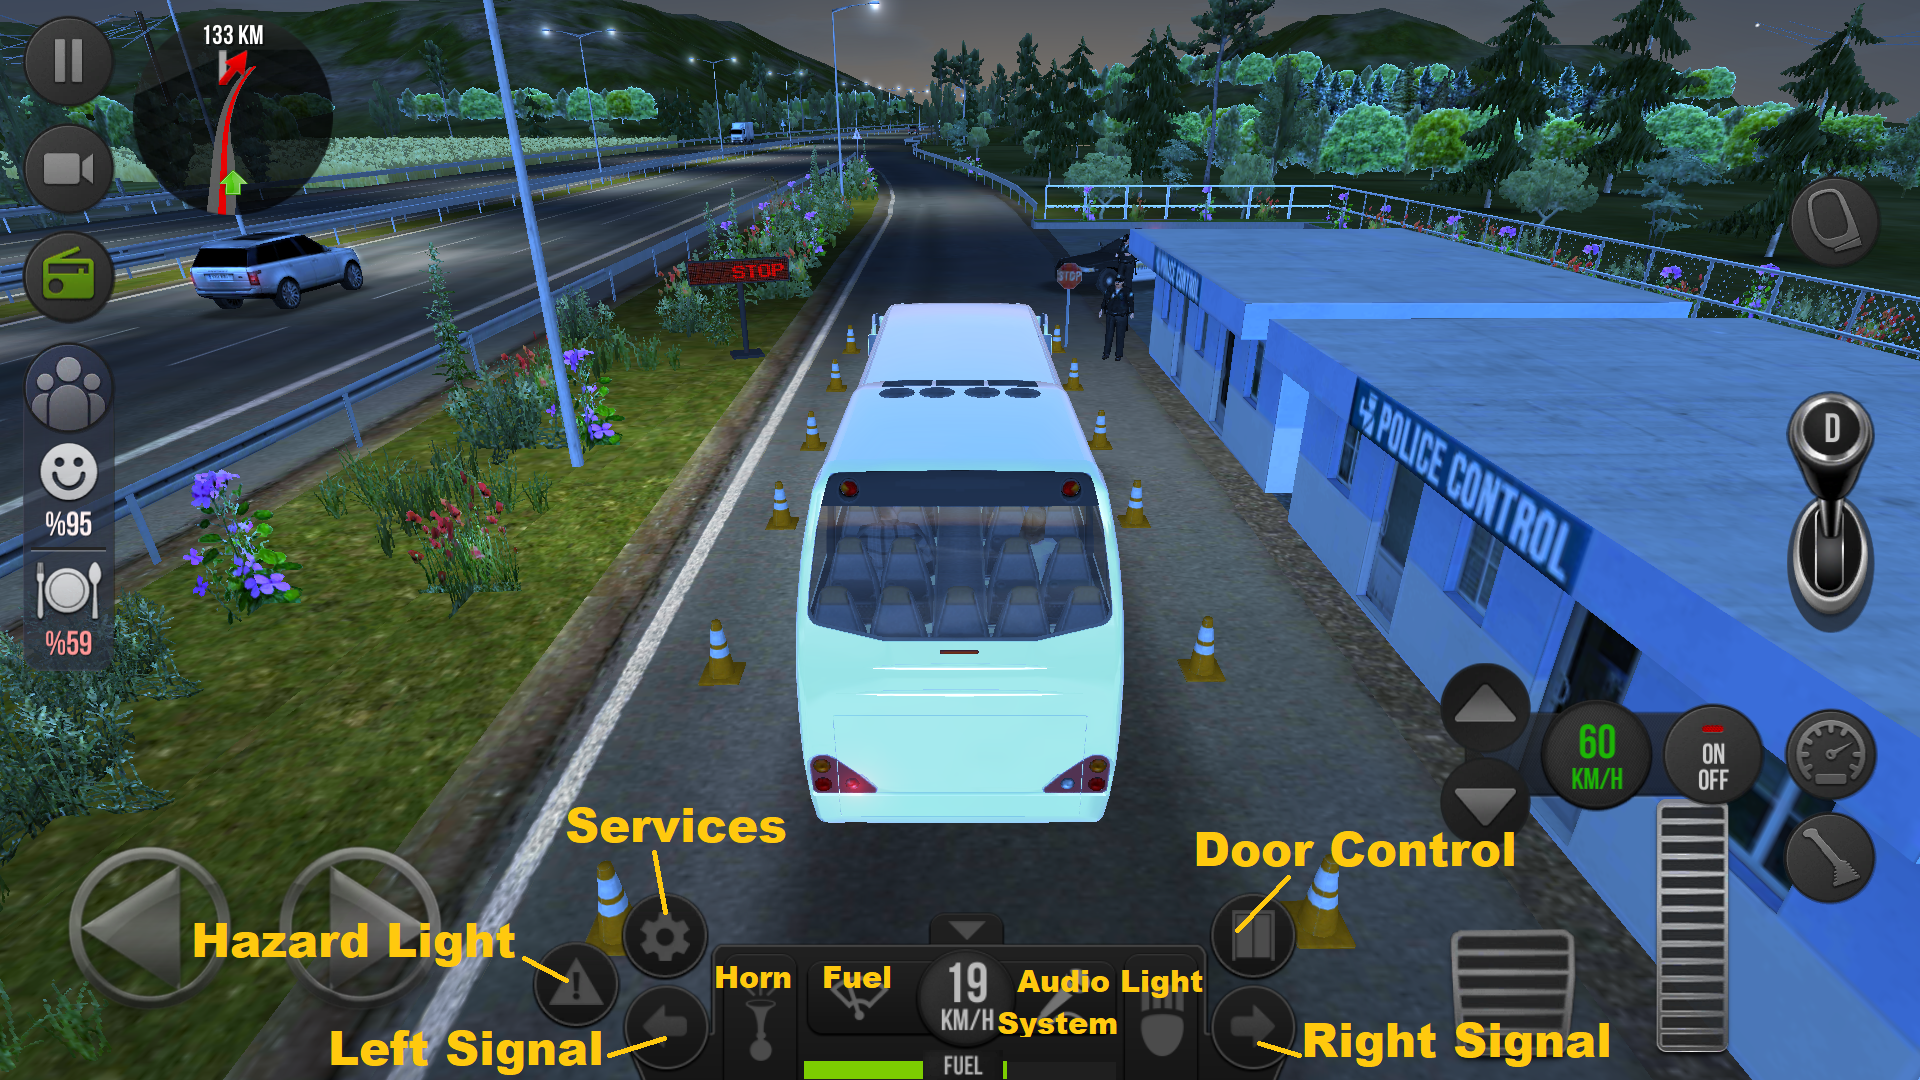 What Are The Buttons Around The Control Panel Bus Simulator Ultimate Guide And Tips - roblox bus simulator how to get small drivable bus